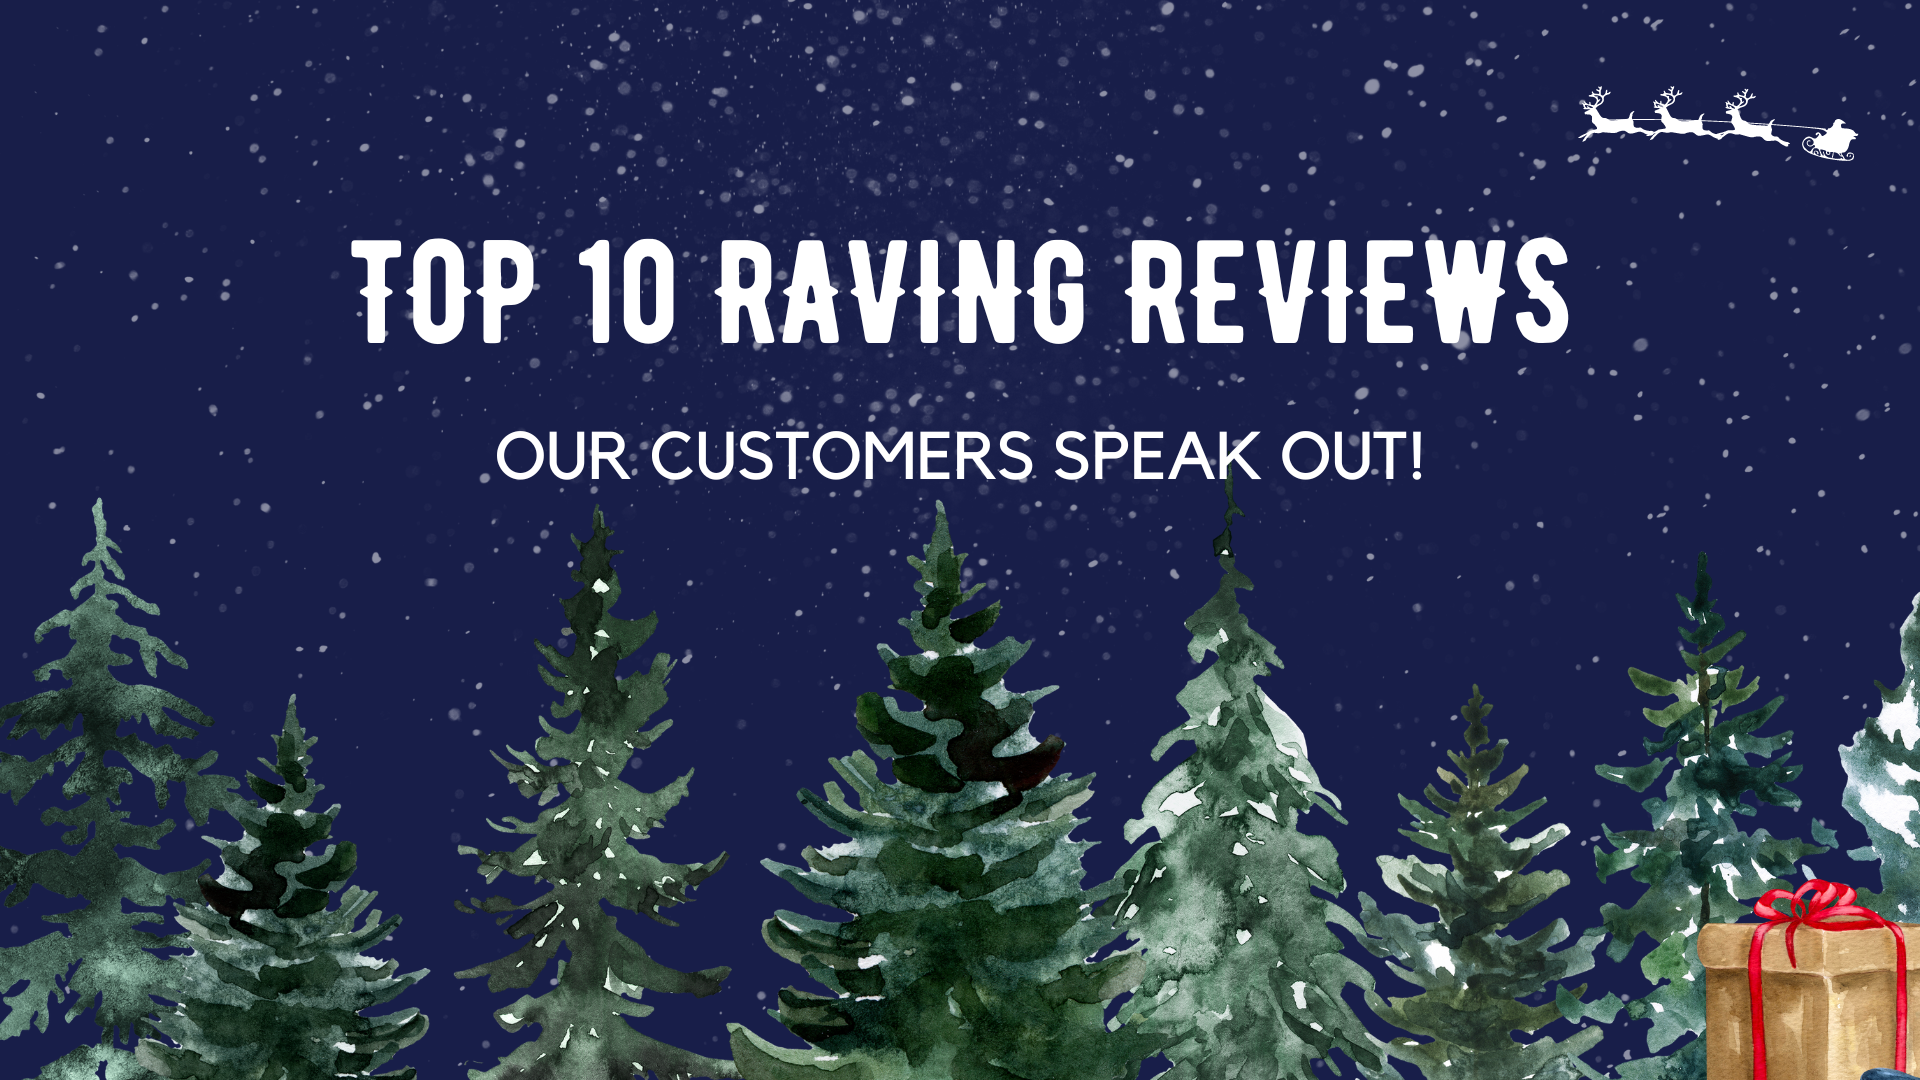 Top 10 Raving Reviews: Our Customers Speak Out! - December 17th